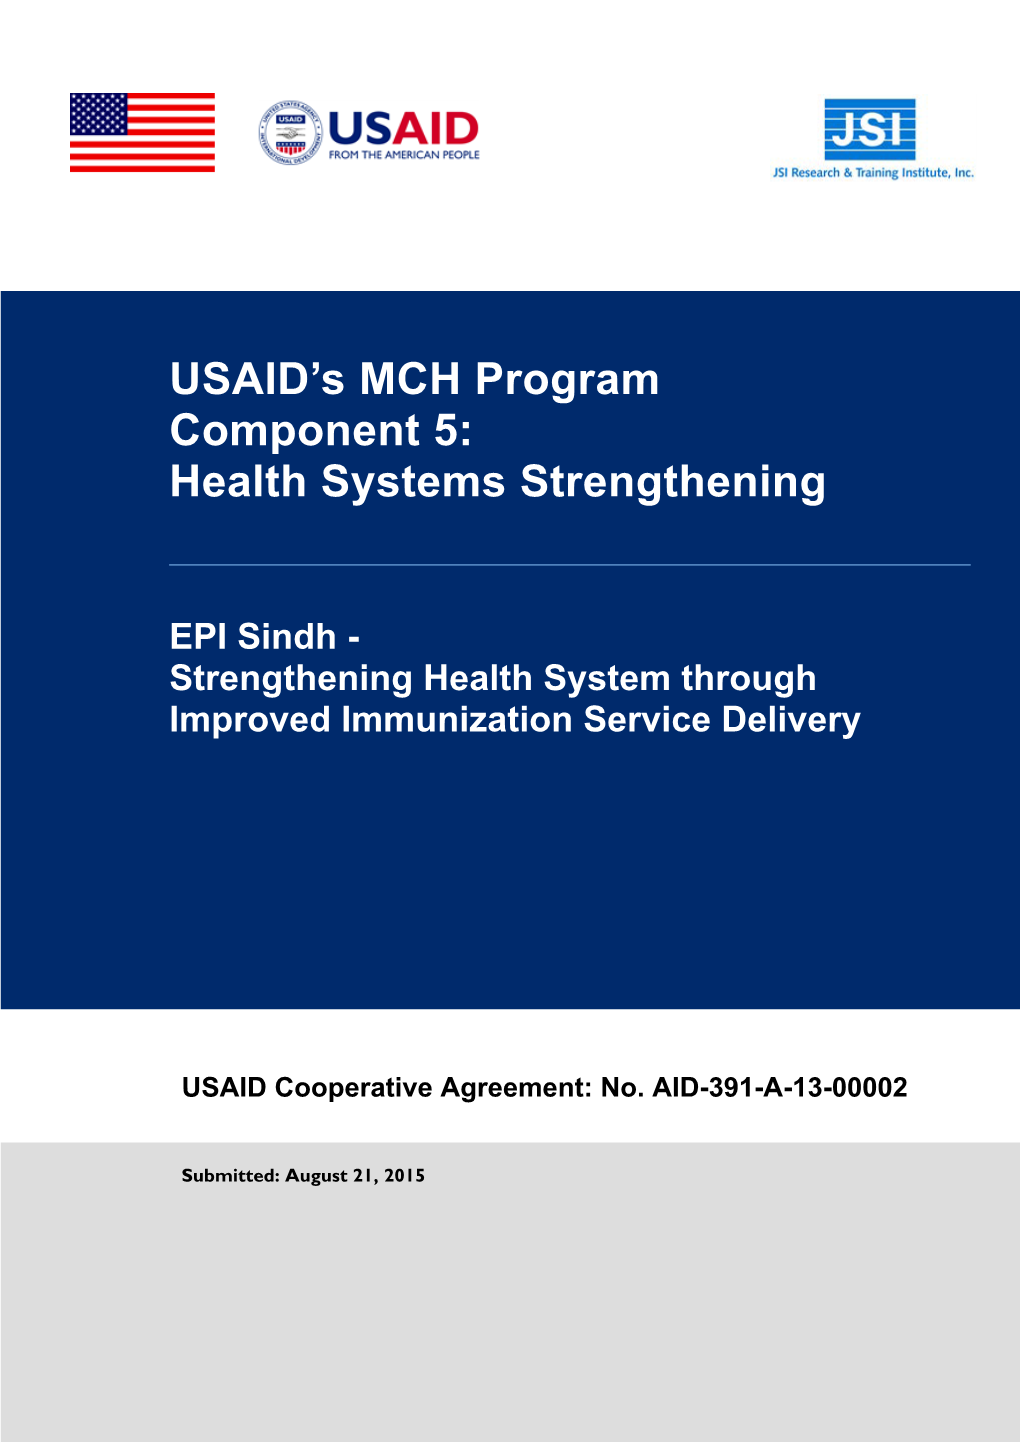 USAID's MCH Program Component 5: Health Systems Strengthening